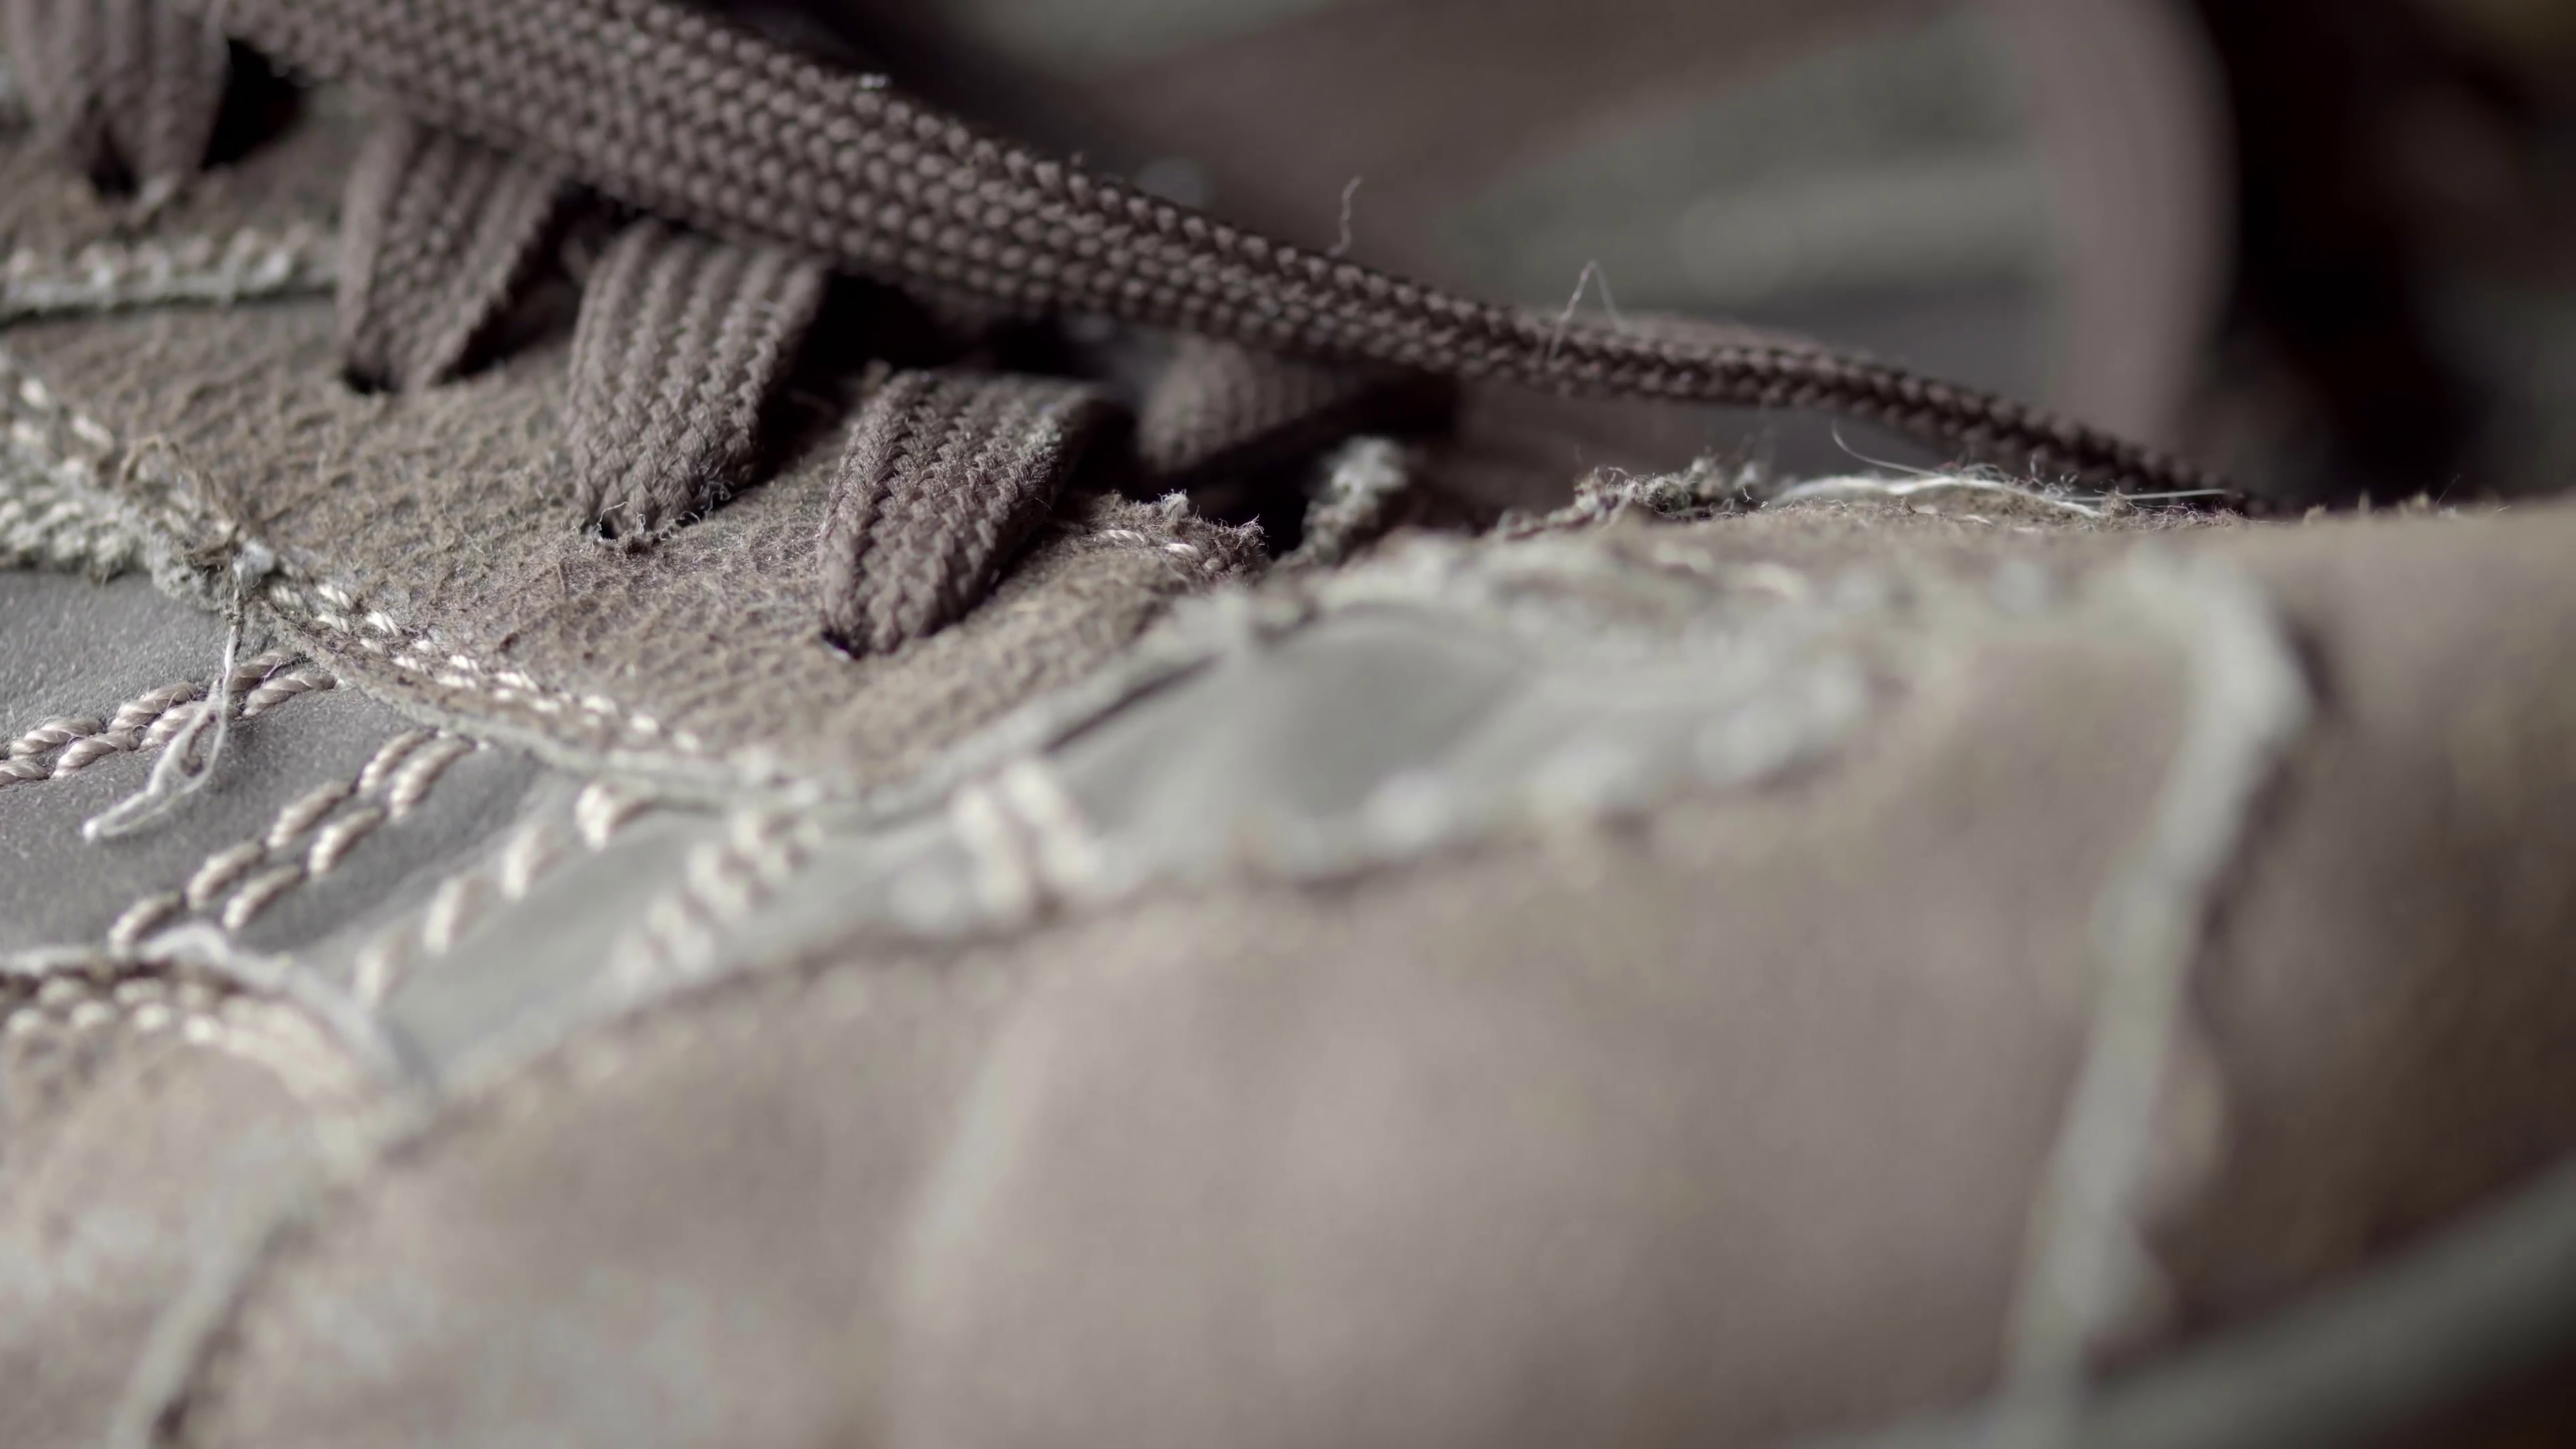 Brown leather shoe in extreme close up UHD stock footage. True macro ...